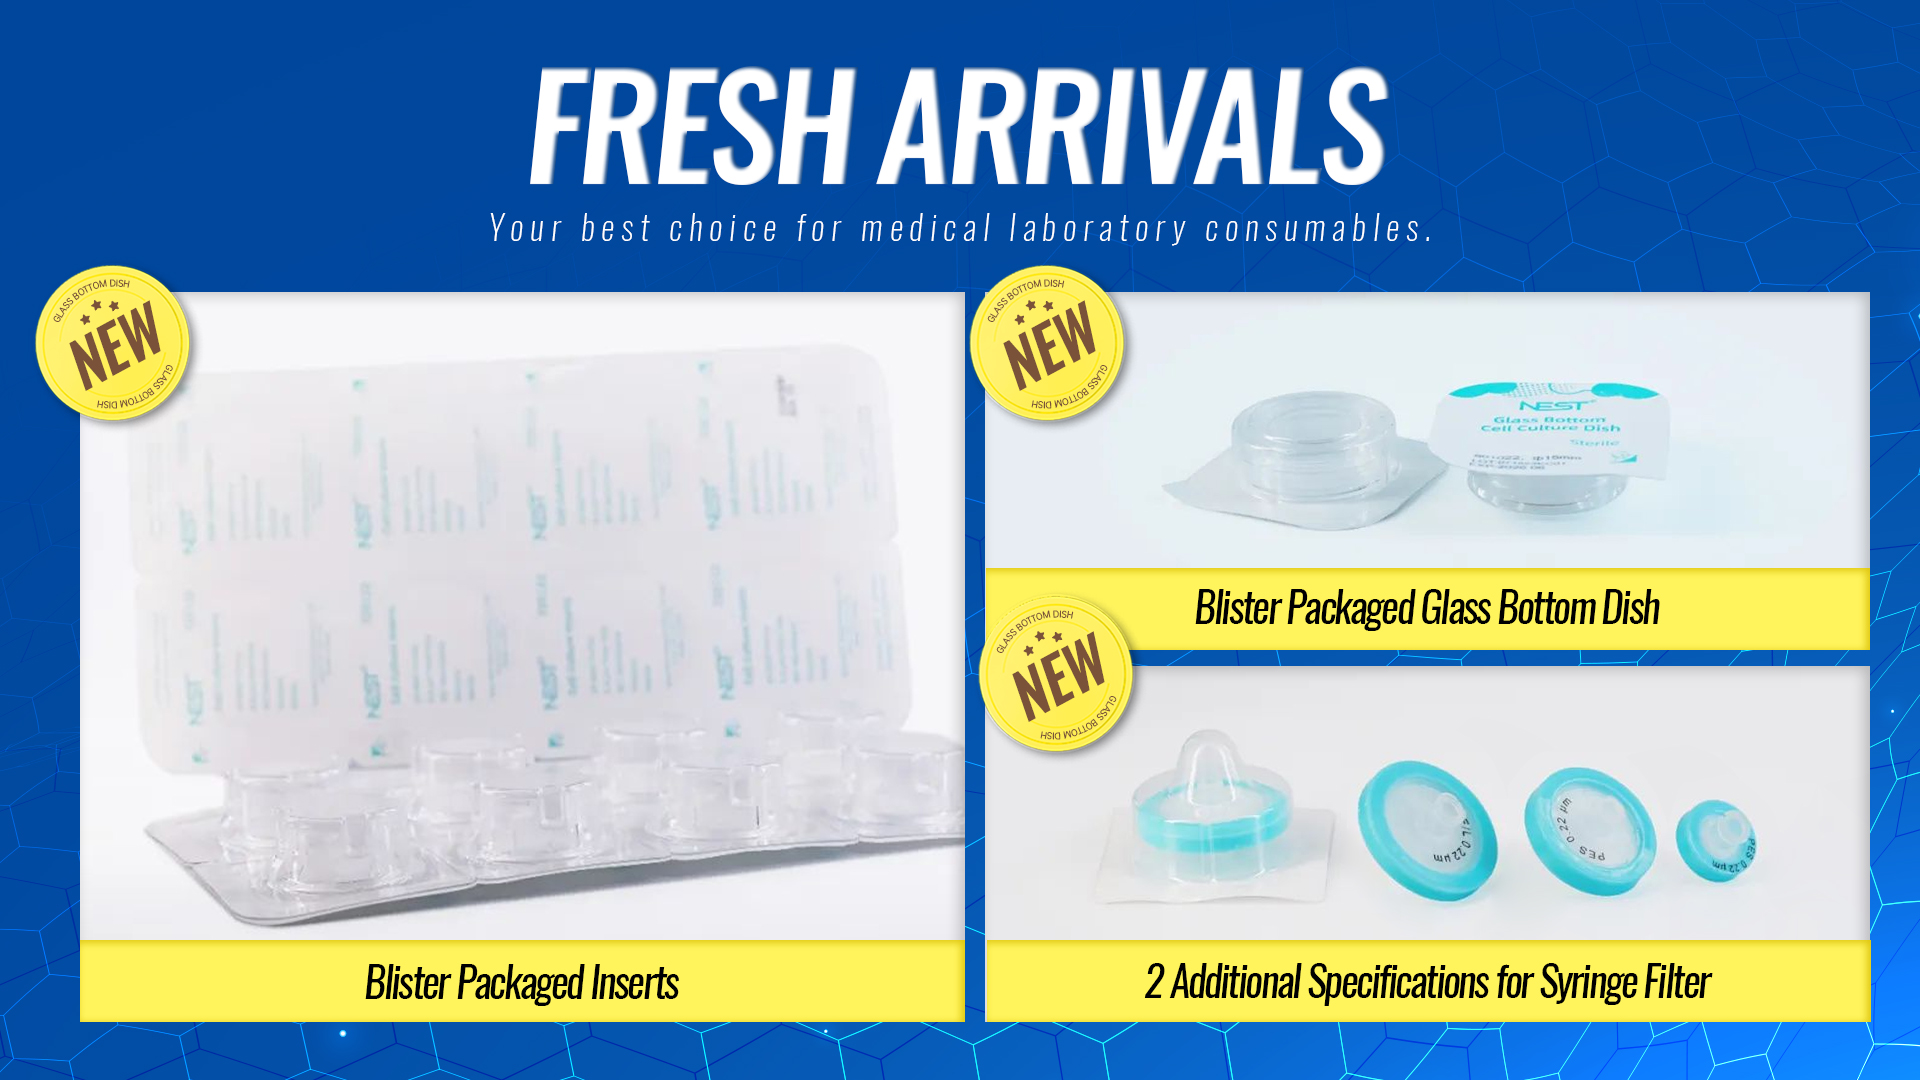 Fresh Arrivals: Cell Culture Inserts & Glass Bottom Dish in blister pack, and 2 additional Syringe Filter specifications 